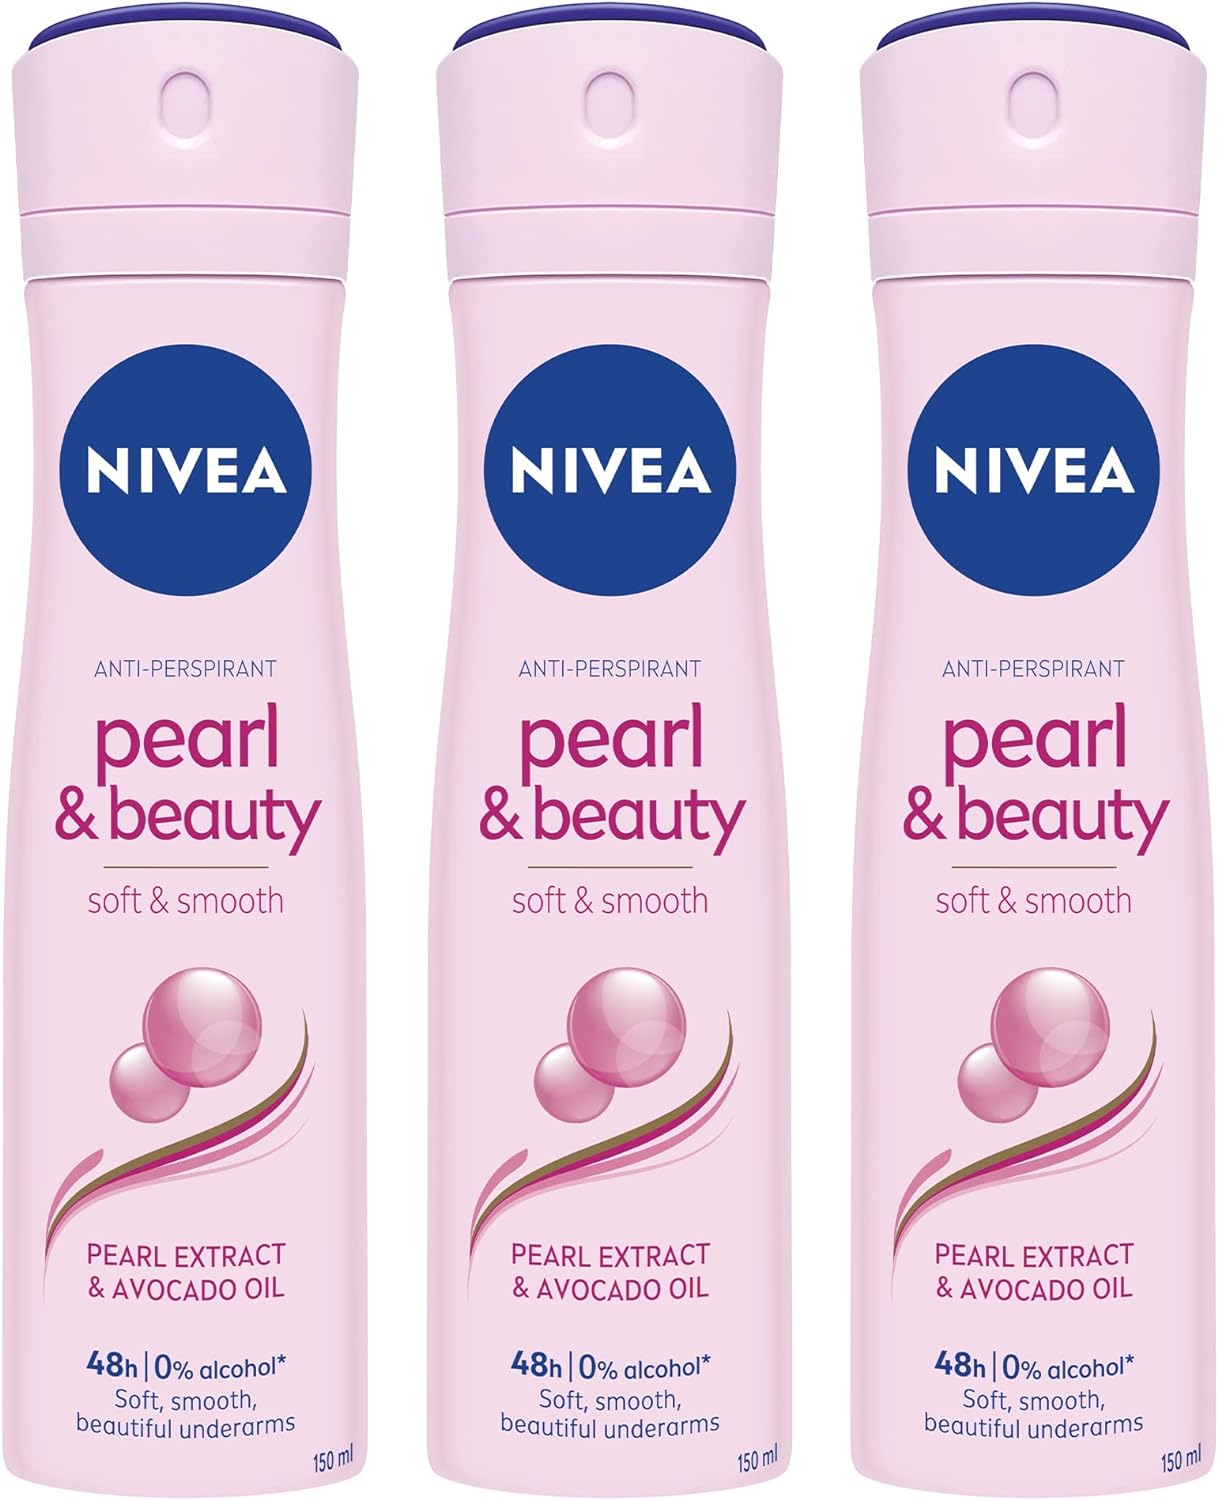 Nivea Antiperspirant Spray for Women, Pearl & Beauty Pearl Extracts, 3x150ml